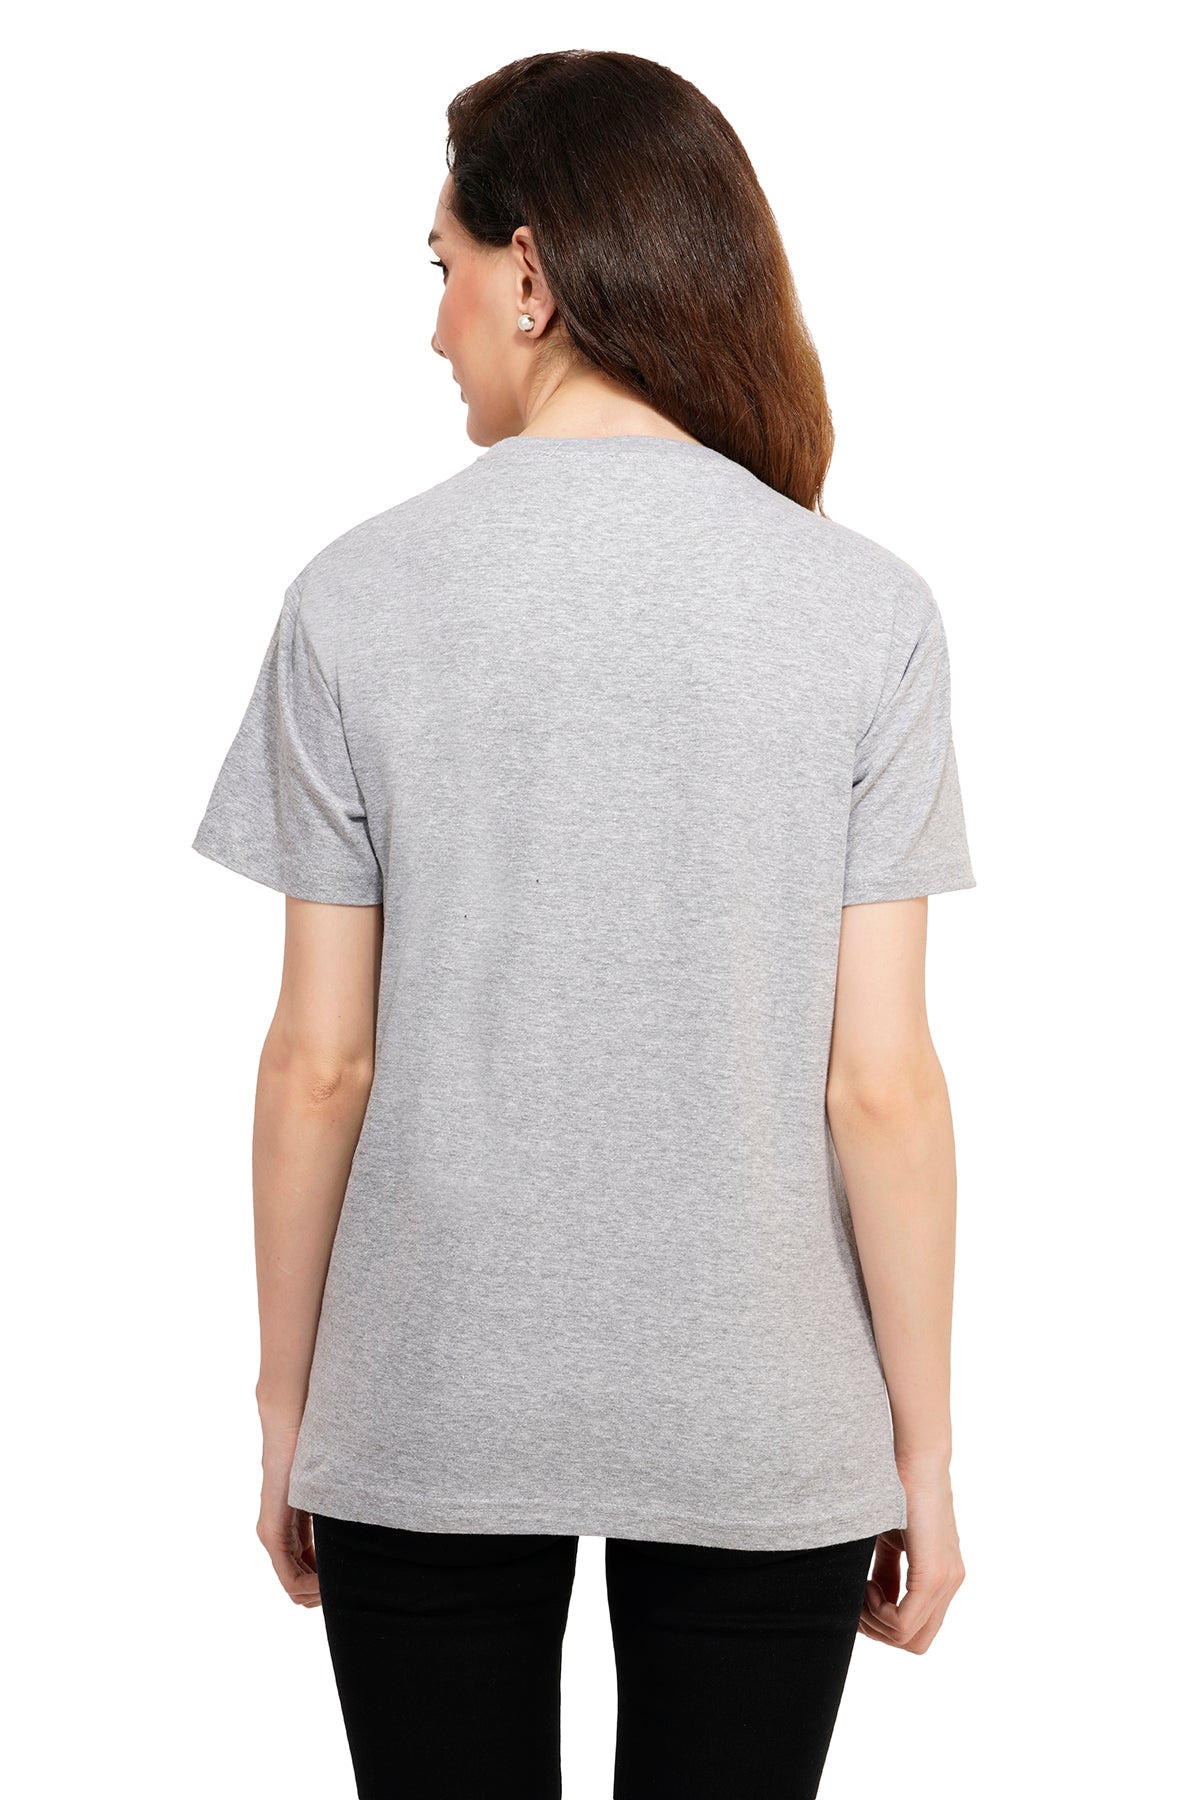 – refection SNAZZYNSUAVE Grey t-shirt Heather Women Lake Guitar